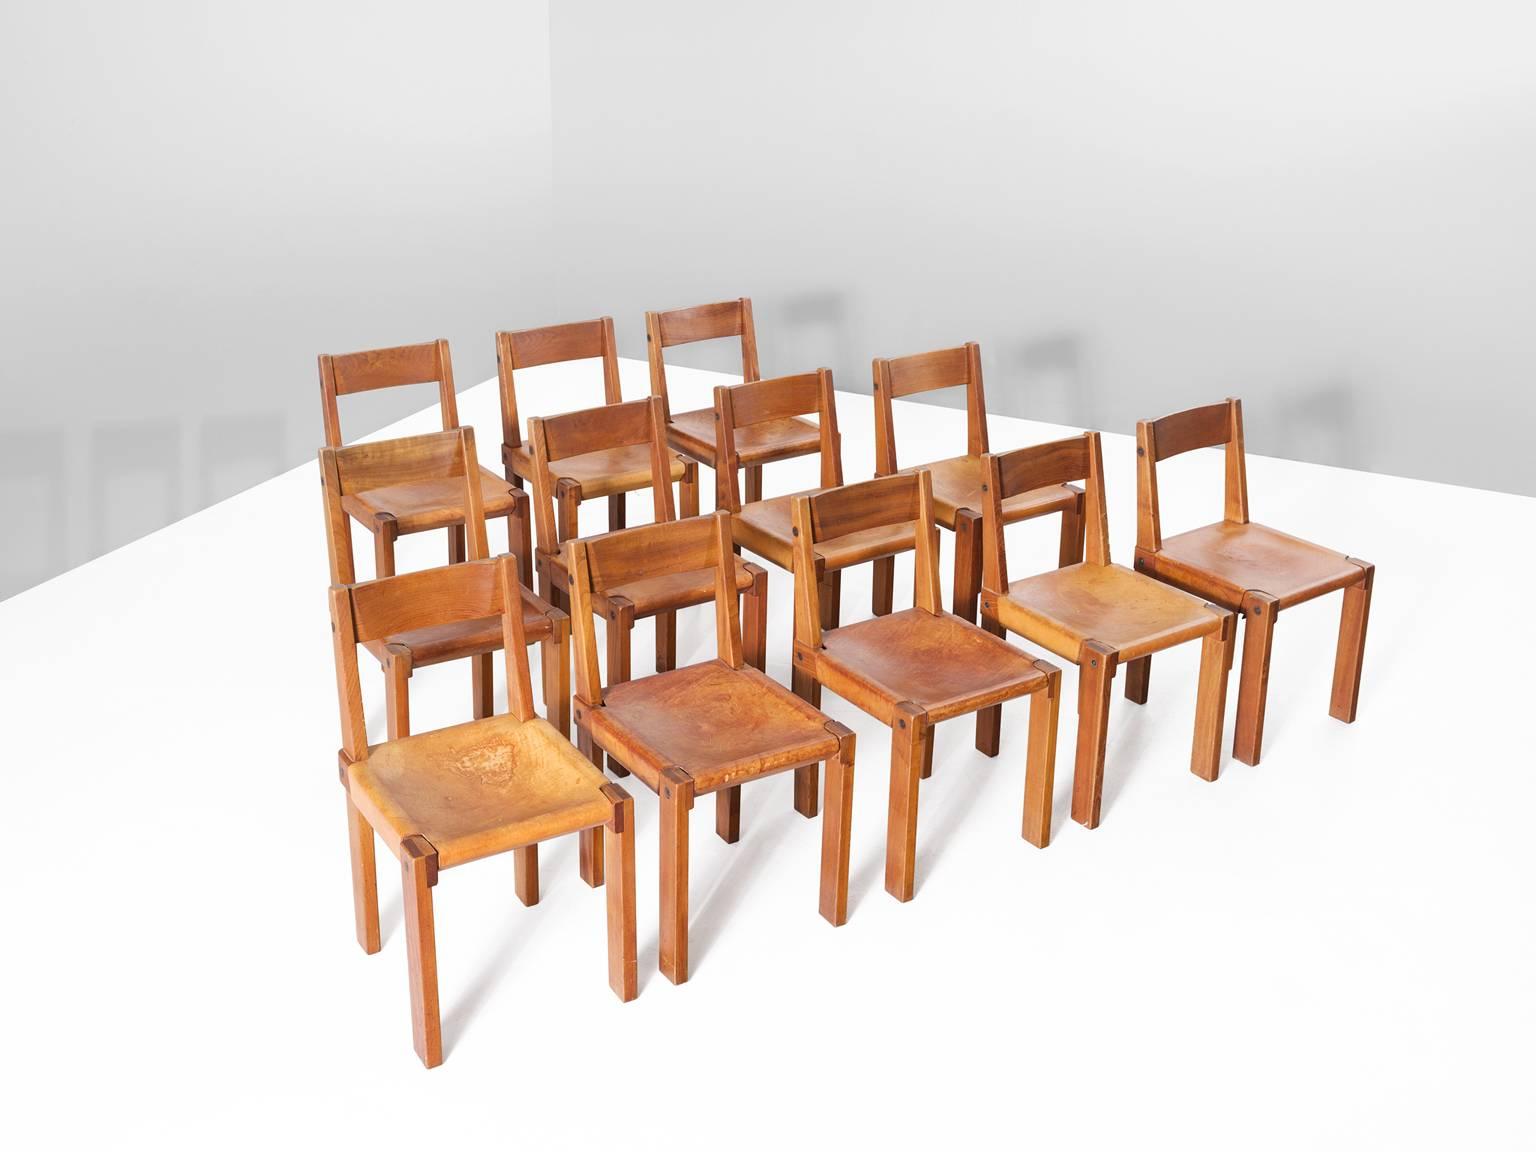 Set of 12 chairs model S24, in elm and leather by Pierre Chapo, France, 1960s.

Large set of 12 dining chairs by French designer and carpenter Pierre Chapo. The chairs consist of solid elmwood with a saddle leather seat. The design of the chairs